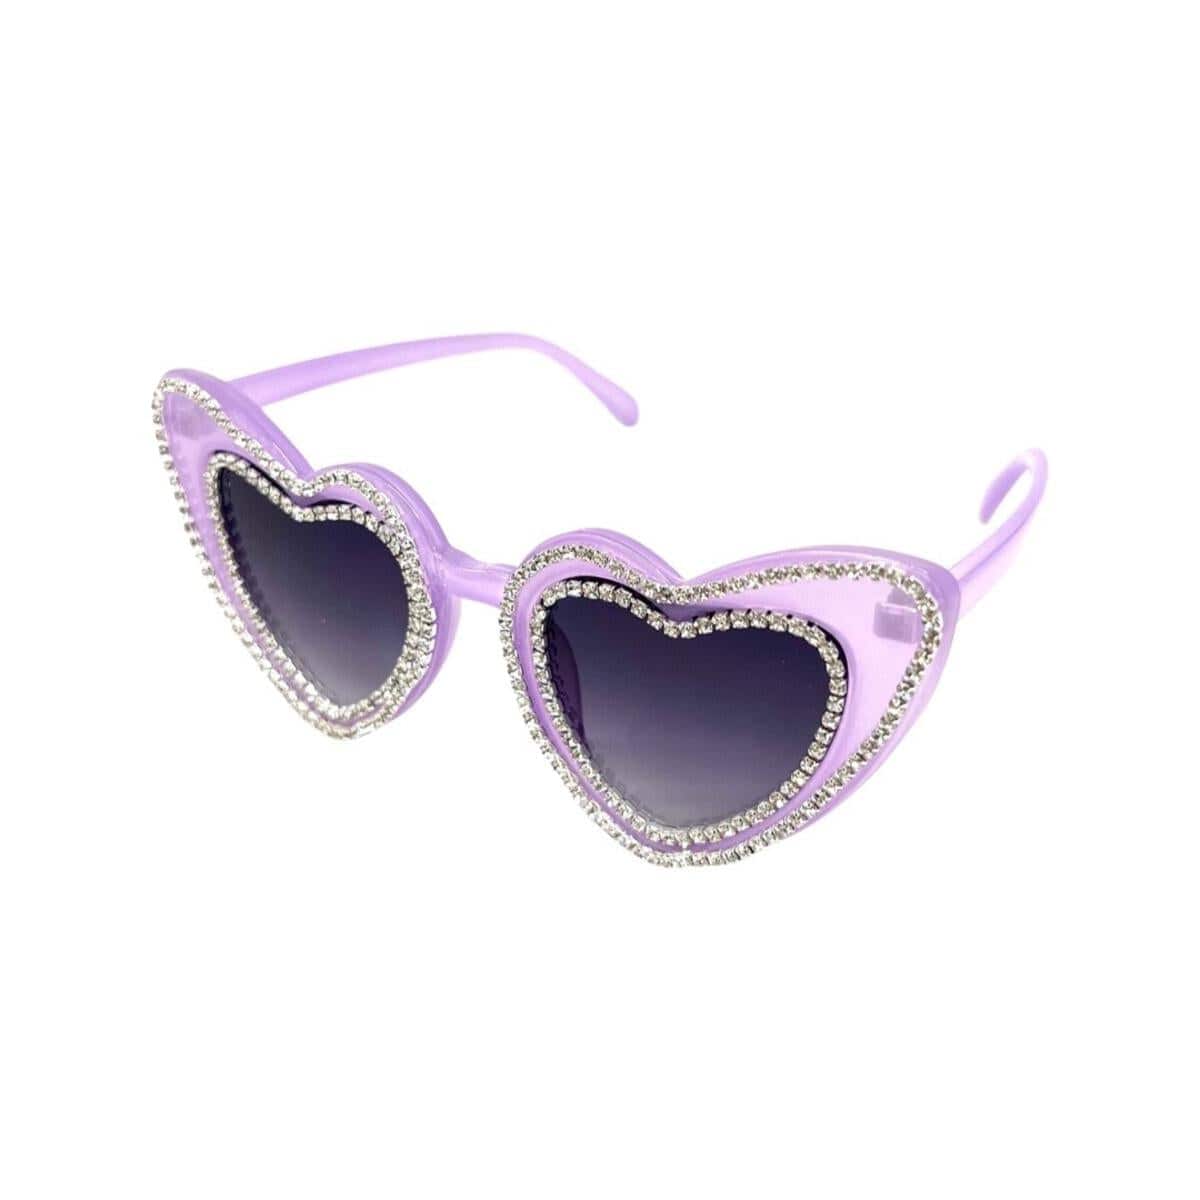 Double Crystalized Small Heart Lavender Sunglasses - Twinkle Twinkle Little One